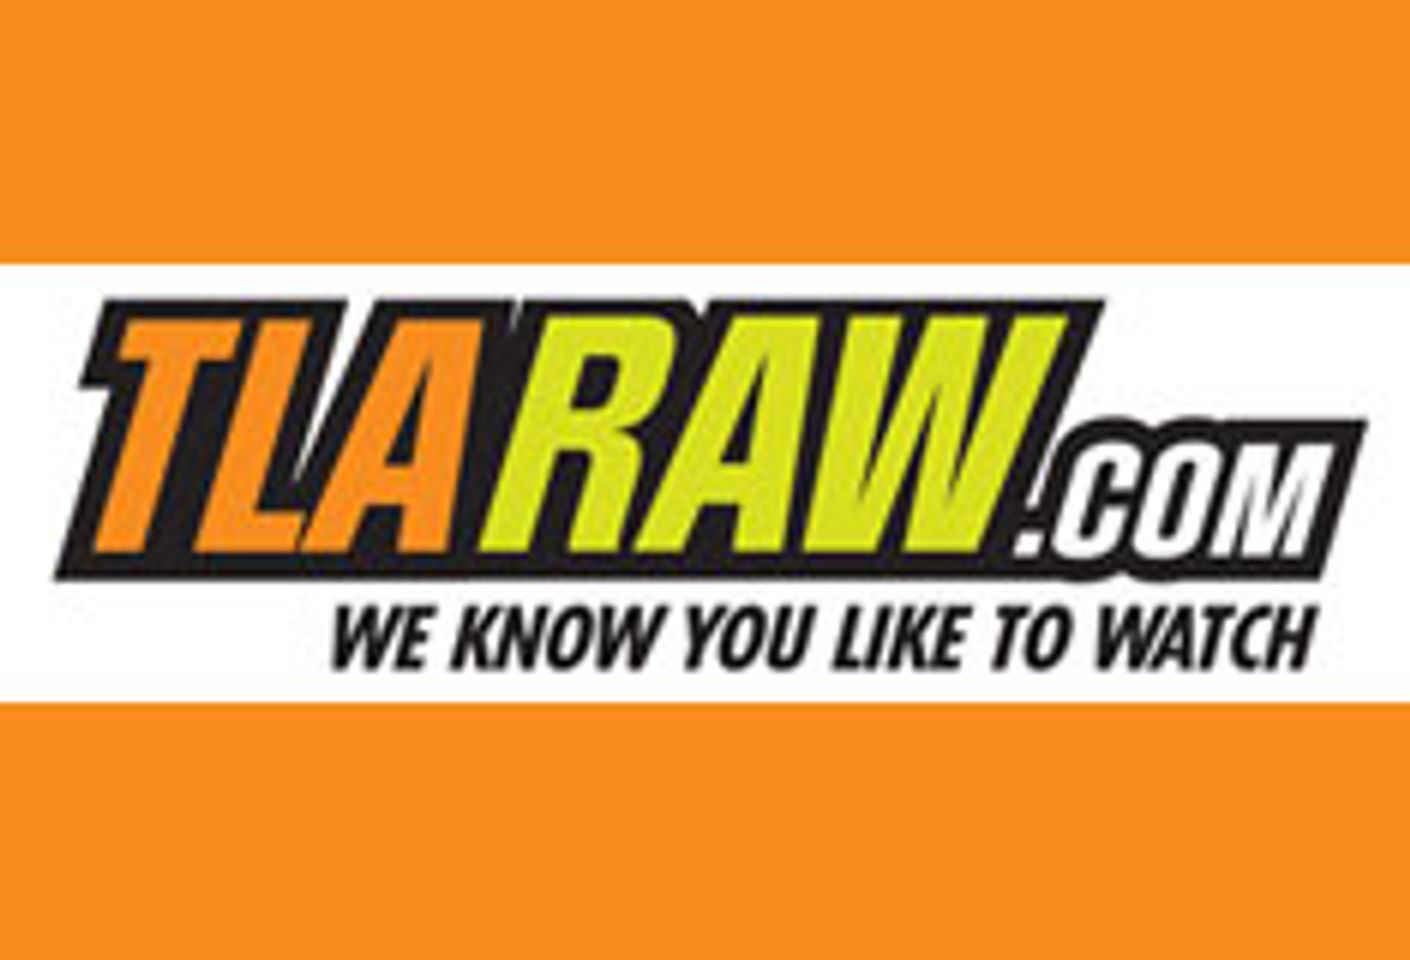 TLARAW.com Launches 3rd Annual Raw Awards